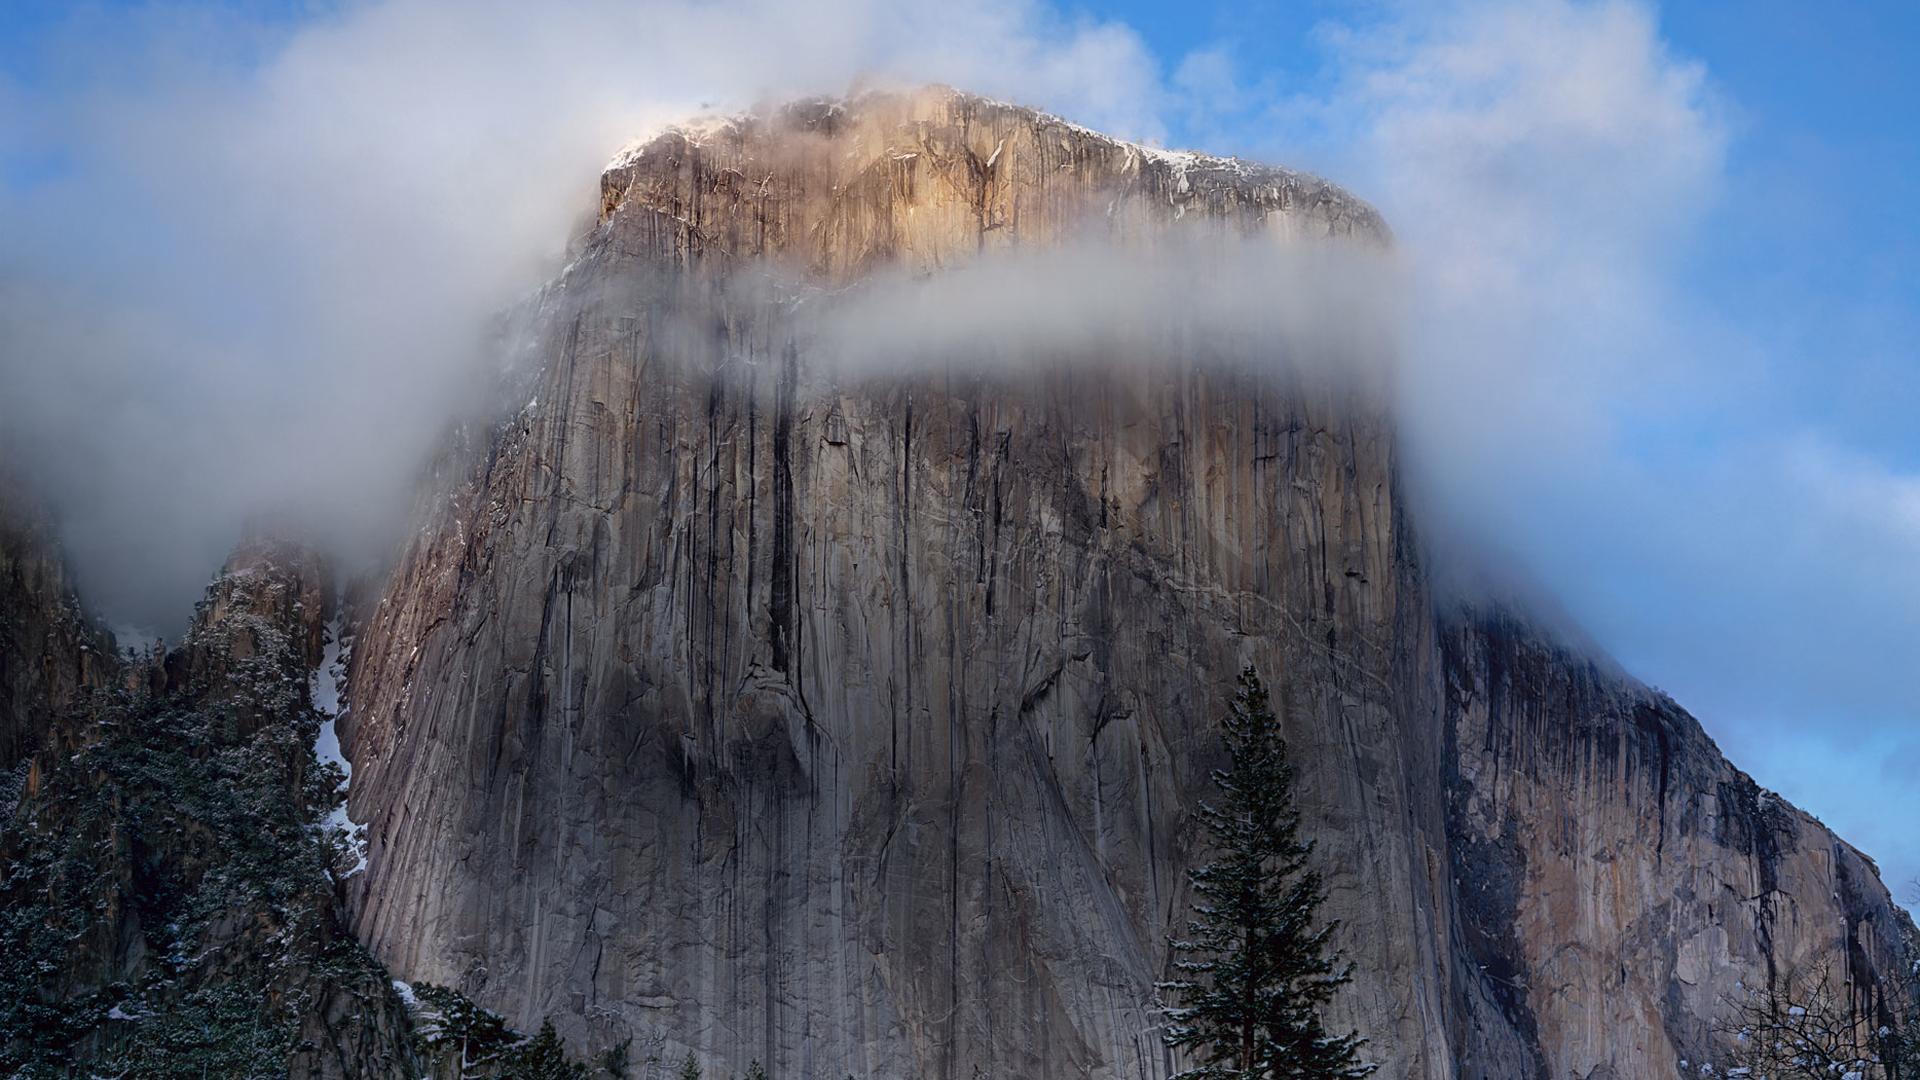 Download the first wallpaper for OS X Yosemite and iOS 8